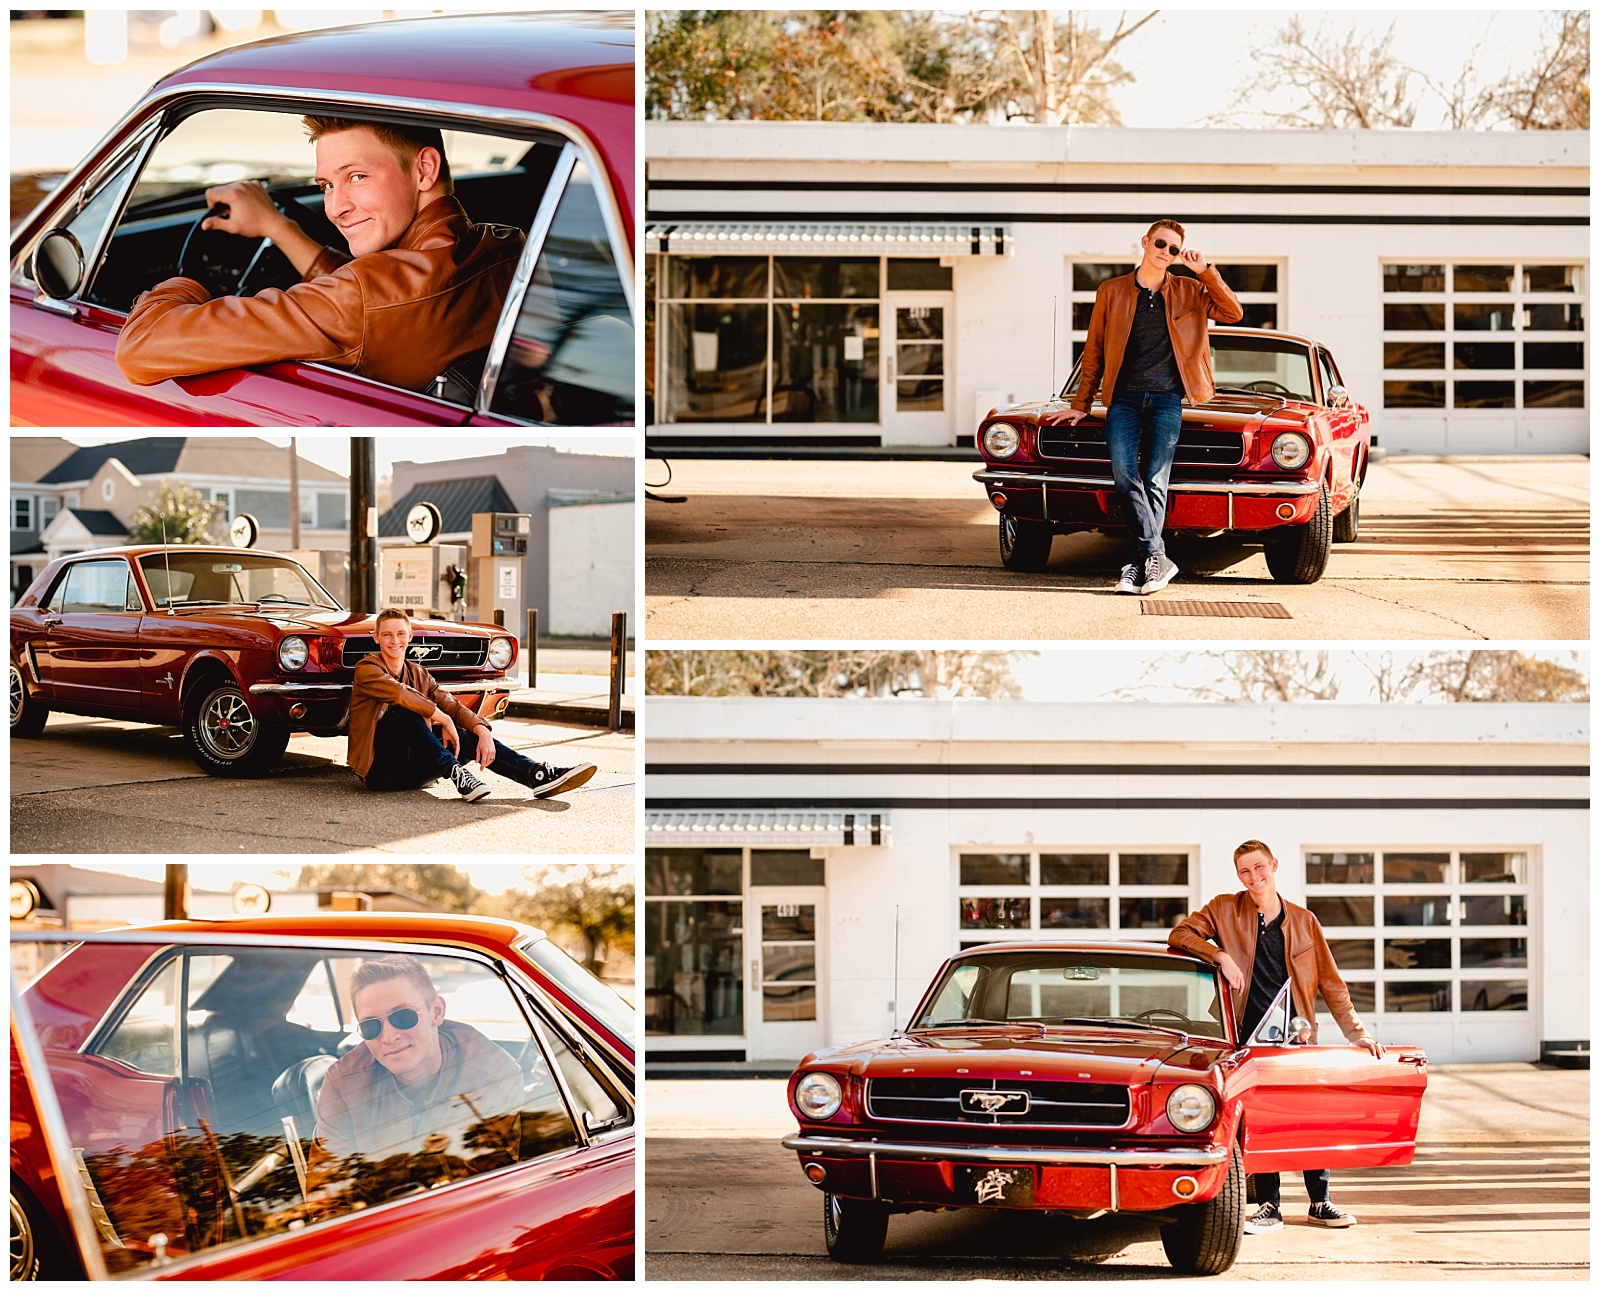 Posing ideas for senior boy and vintage car during photoshoot near Tallahassee, Florida.